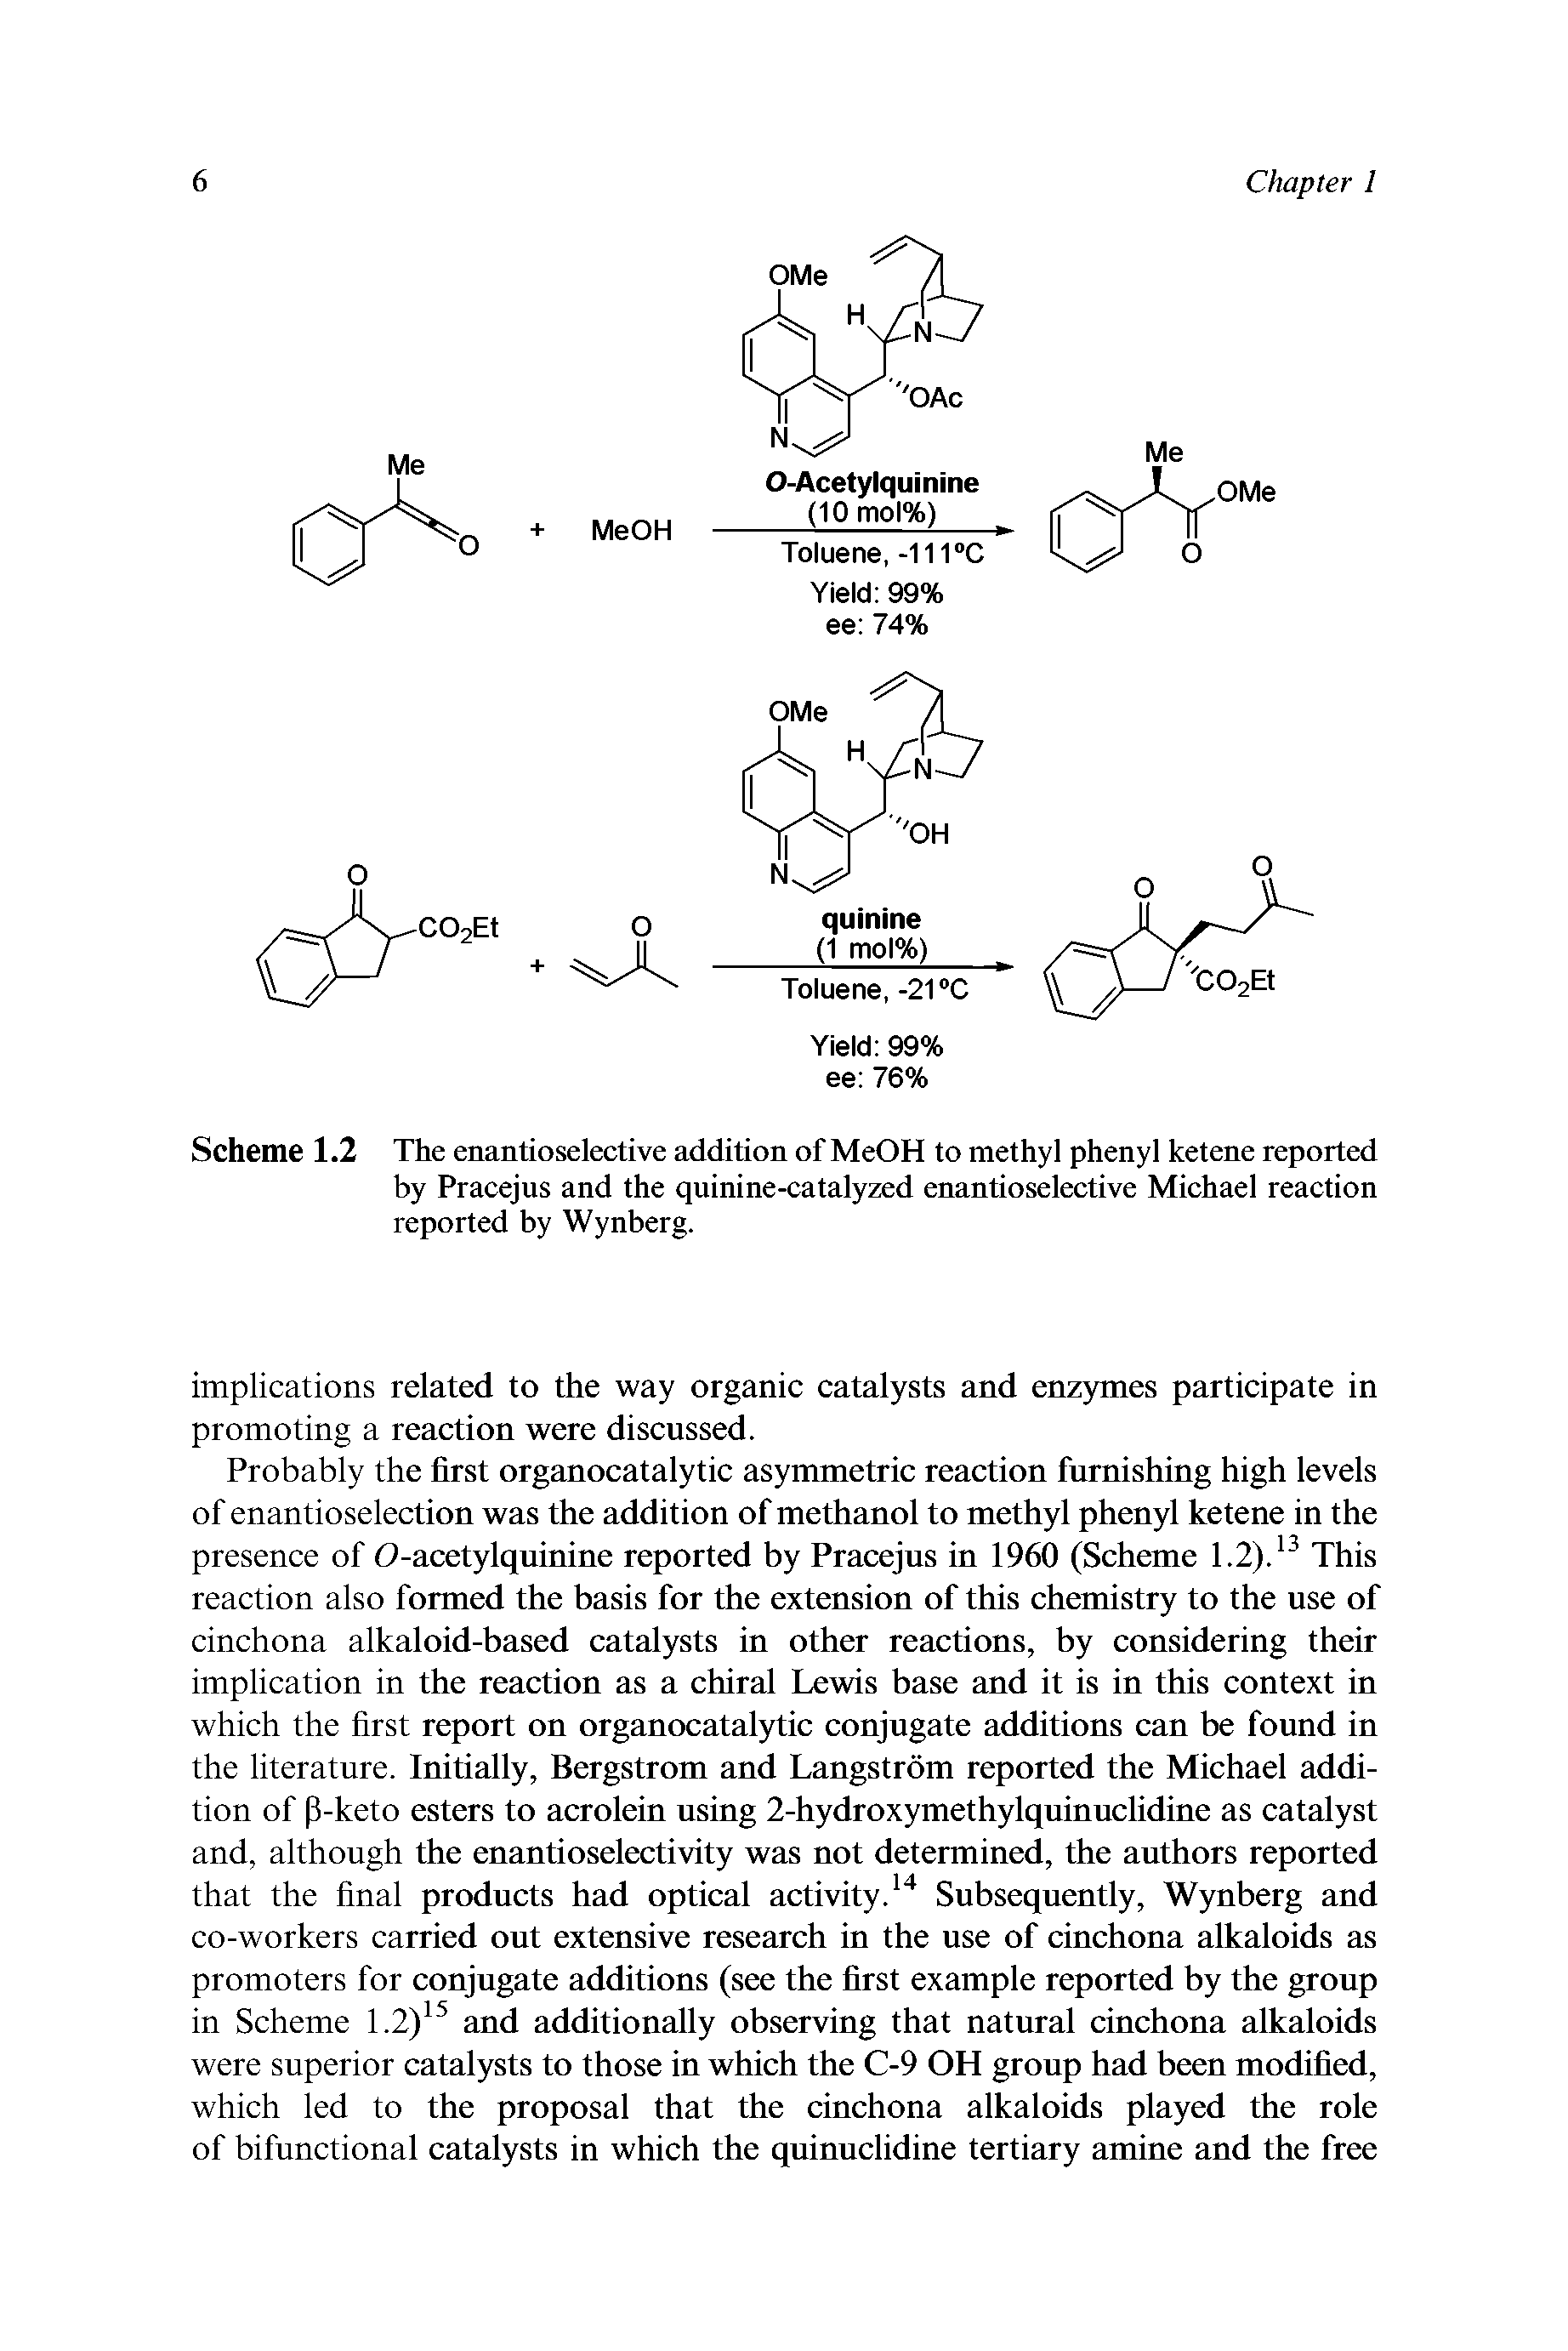 Scheme 1.2 The enantioselective addition of MeOH to methyl phenyl ketene reported by Pracejus and the quinine-catalyzed enantioselective Michael reaction reported by Wynberg.